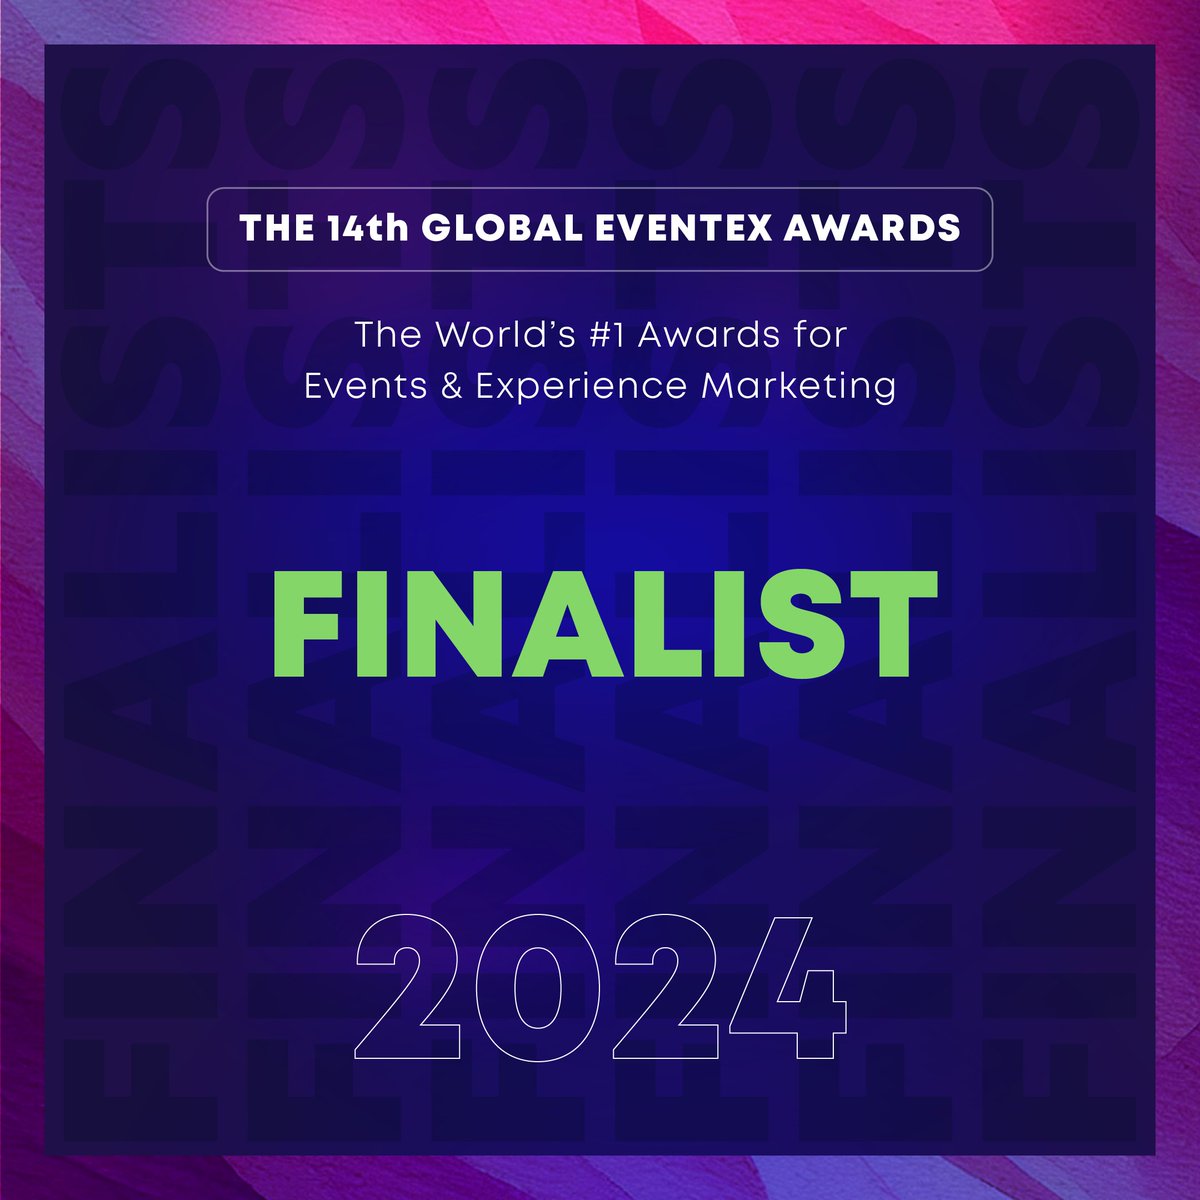 Exciting News! 🌟 We're thrilled to announce that Black Tech Week has been selected as a finalist in the prestigious Eventex Awards 2024! 🏆 This nomination reflects the hard work and creativity of our incredible team. Huge thanks to Eventex Awards for this recognition and to